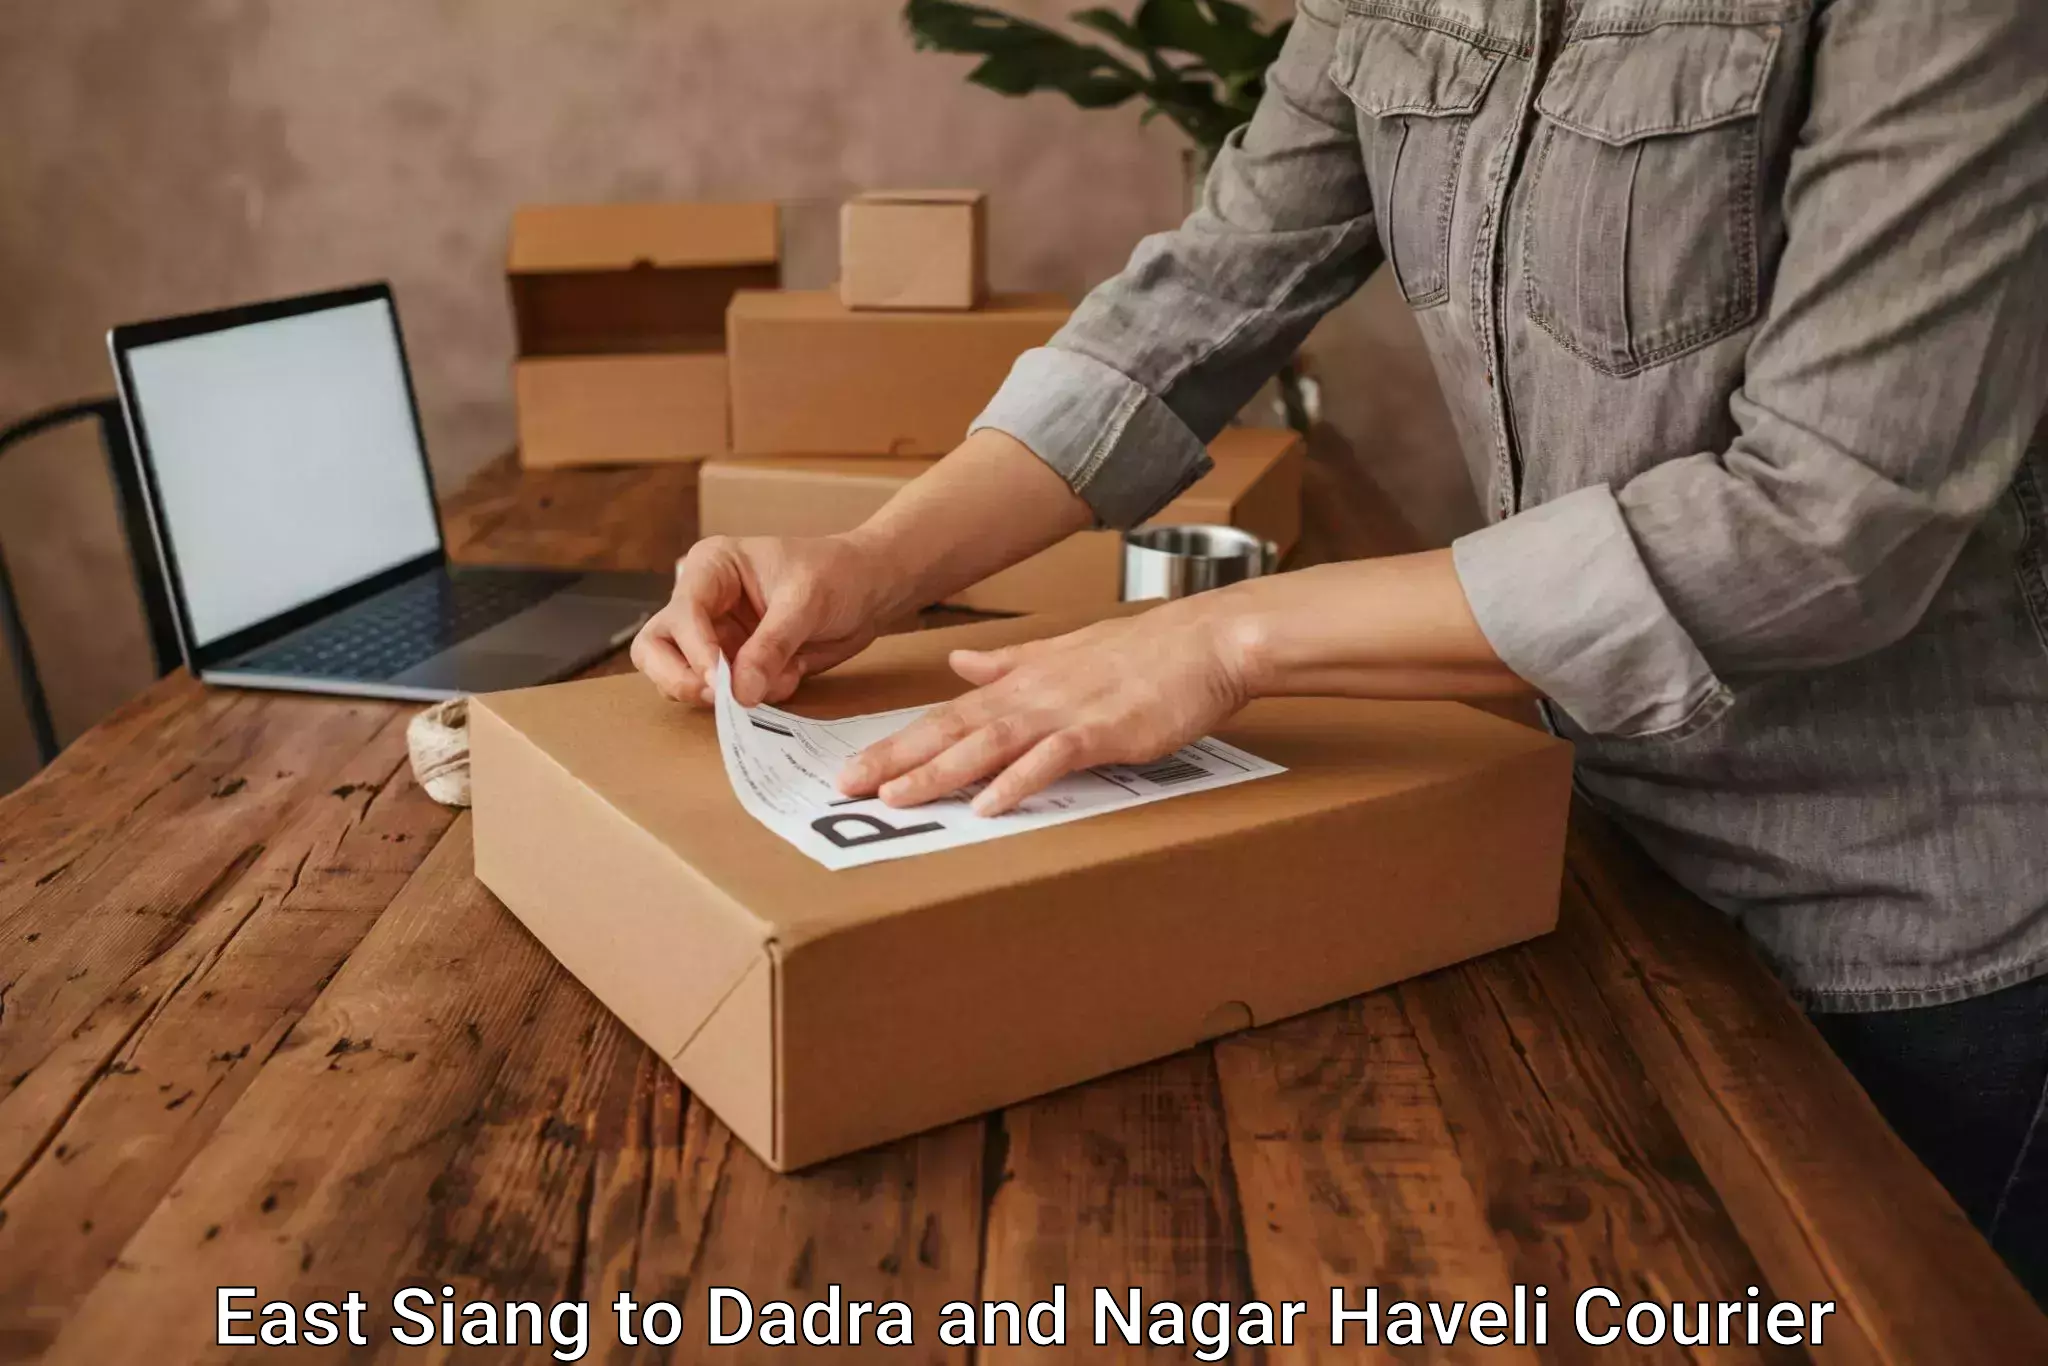 Custom courier packaging East Siang to Dadra and Nagar Haveli